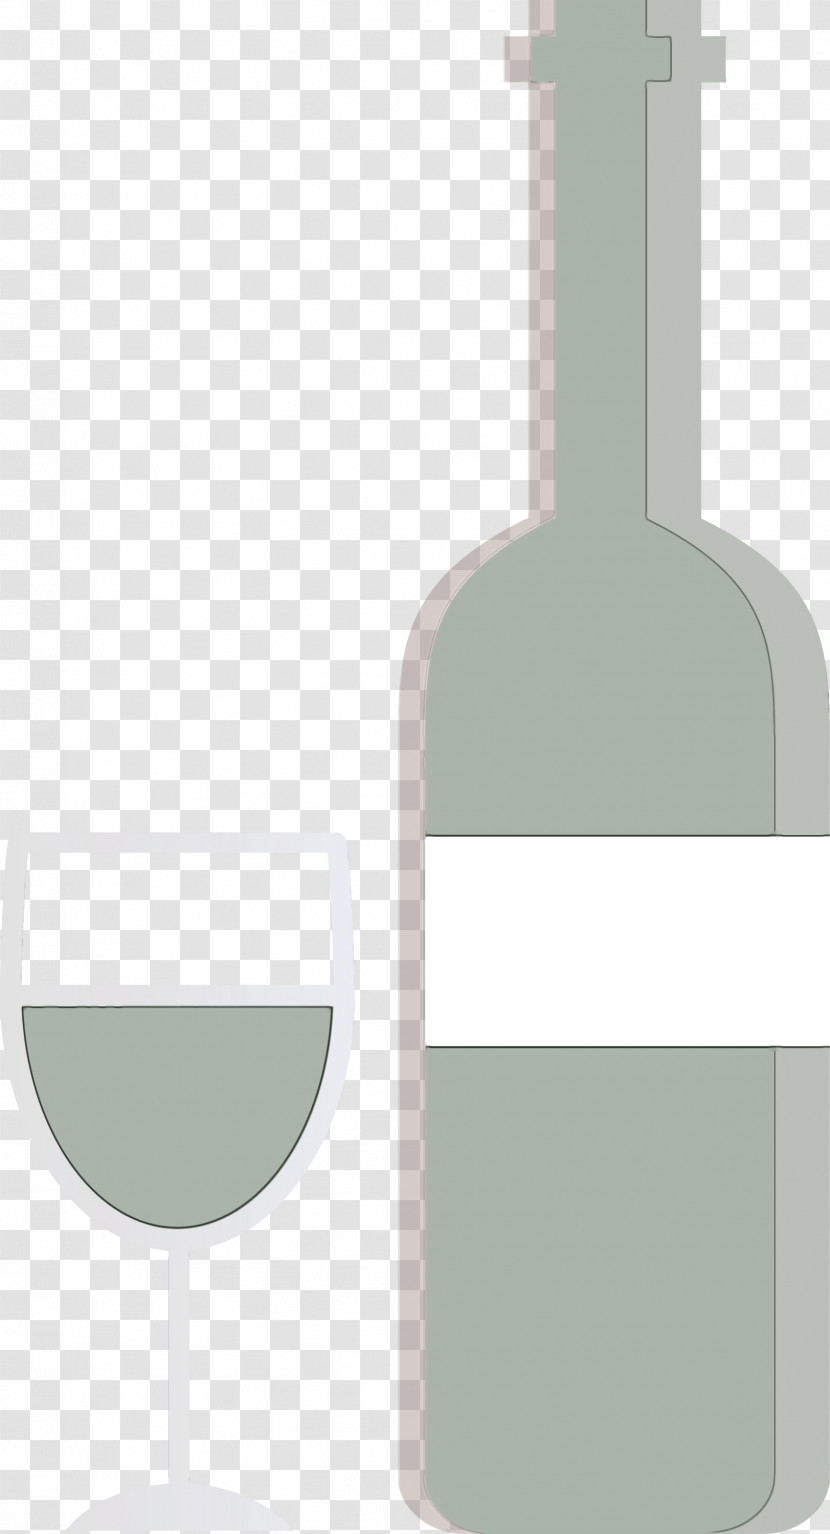 Glass Bottle Wine Bottle Wine Glass Bottle Transparent PNG